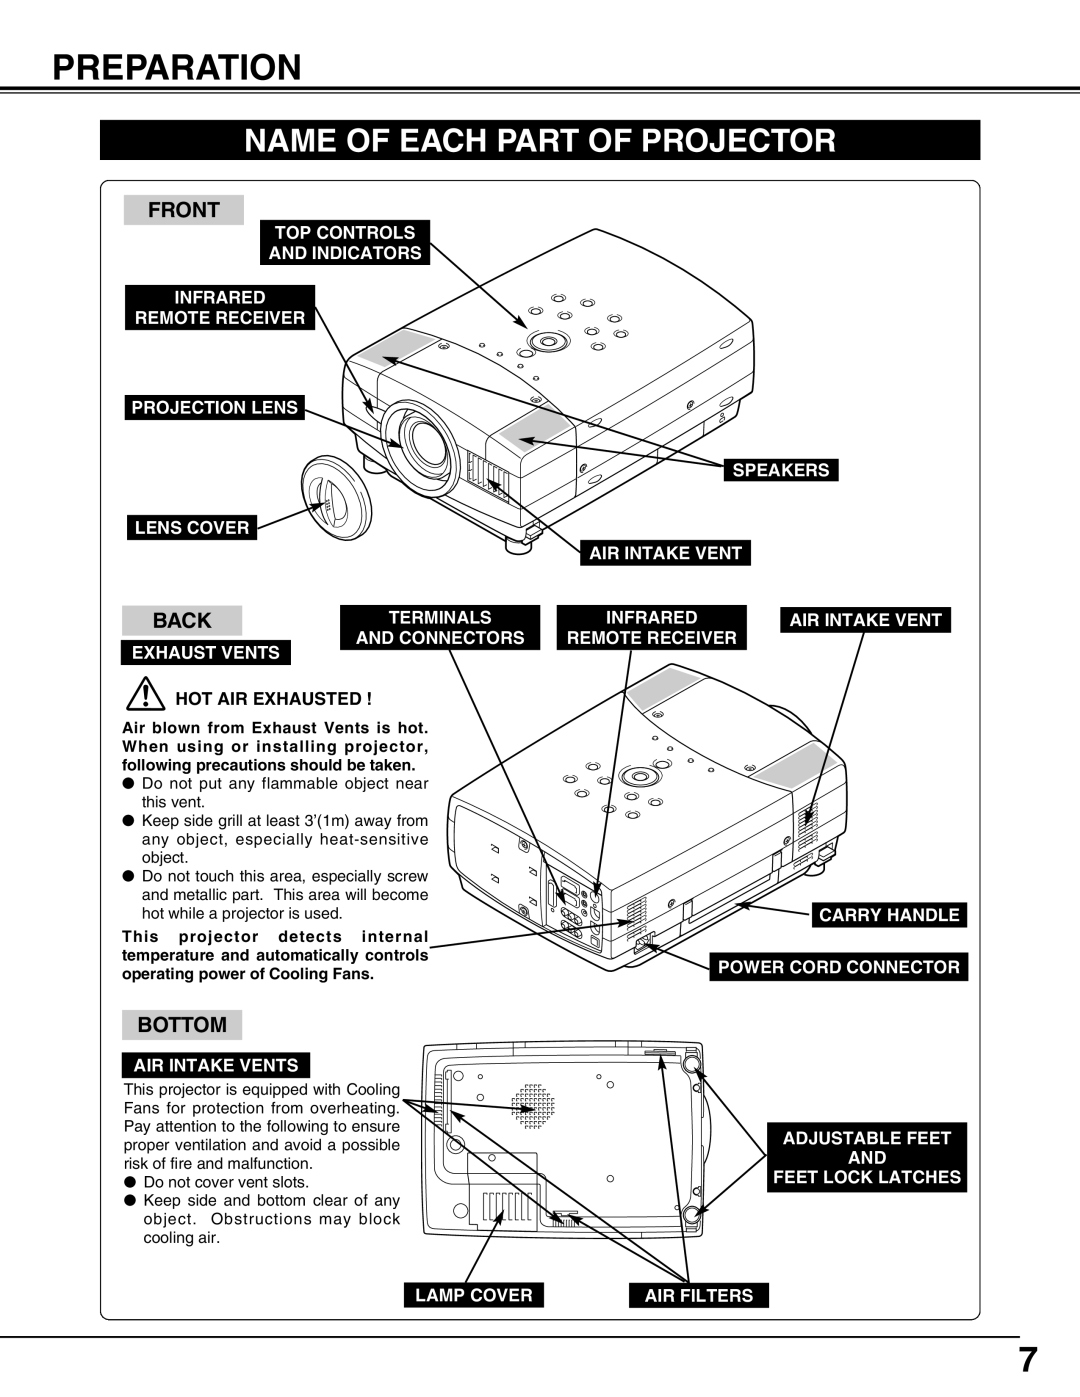 Christie Digital Systems 38-VIV207-01 user manual Preparation, Name Of Each Part Of Projector, Back, Hot Air Exhausted 